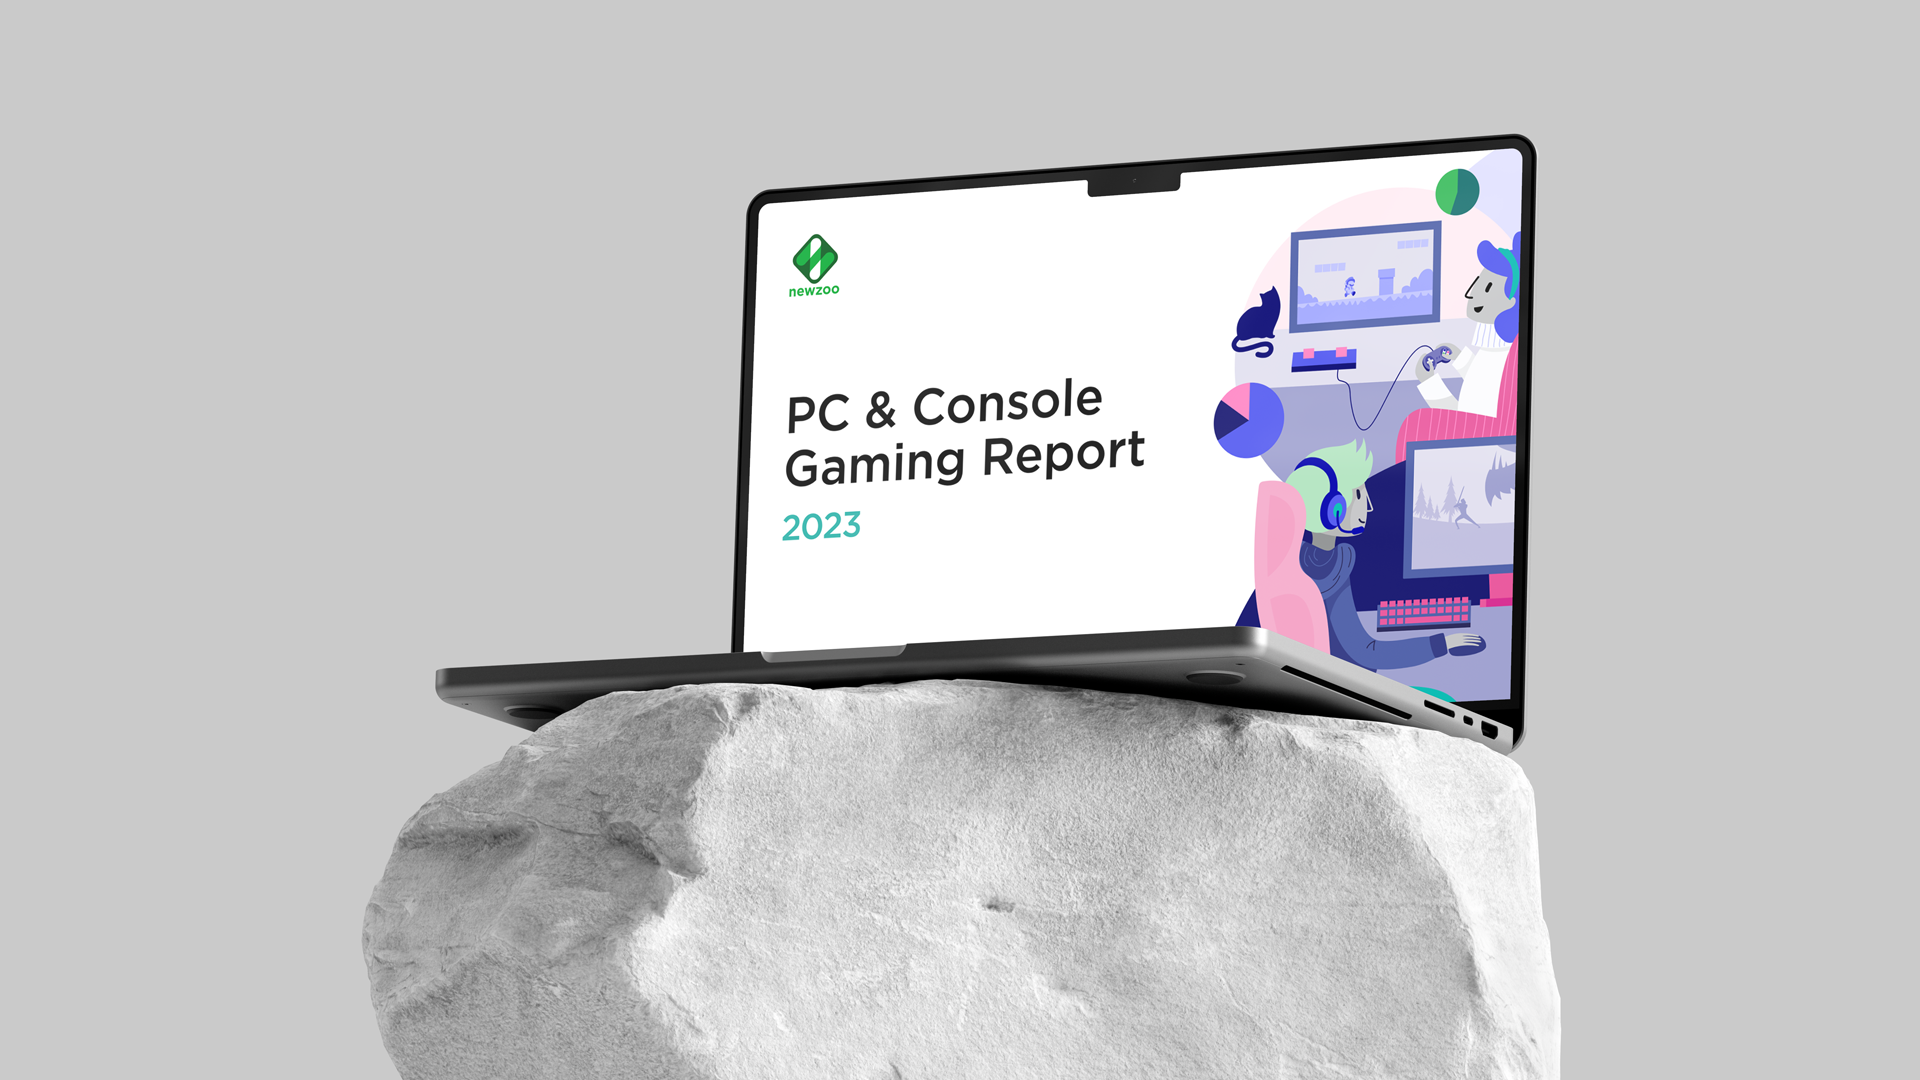 PC and console gaming report 2023